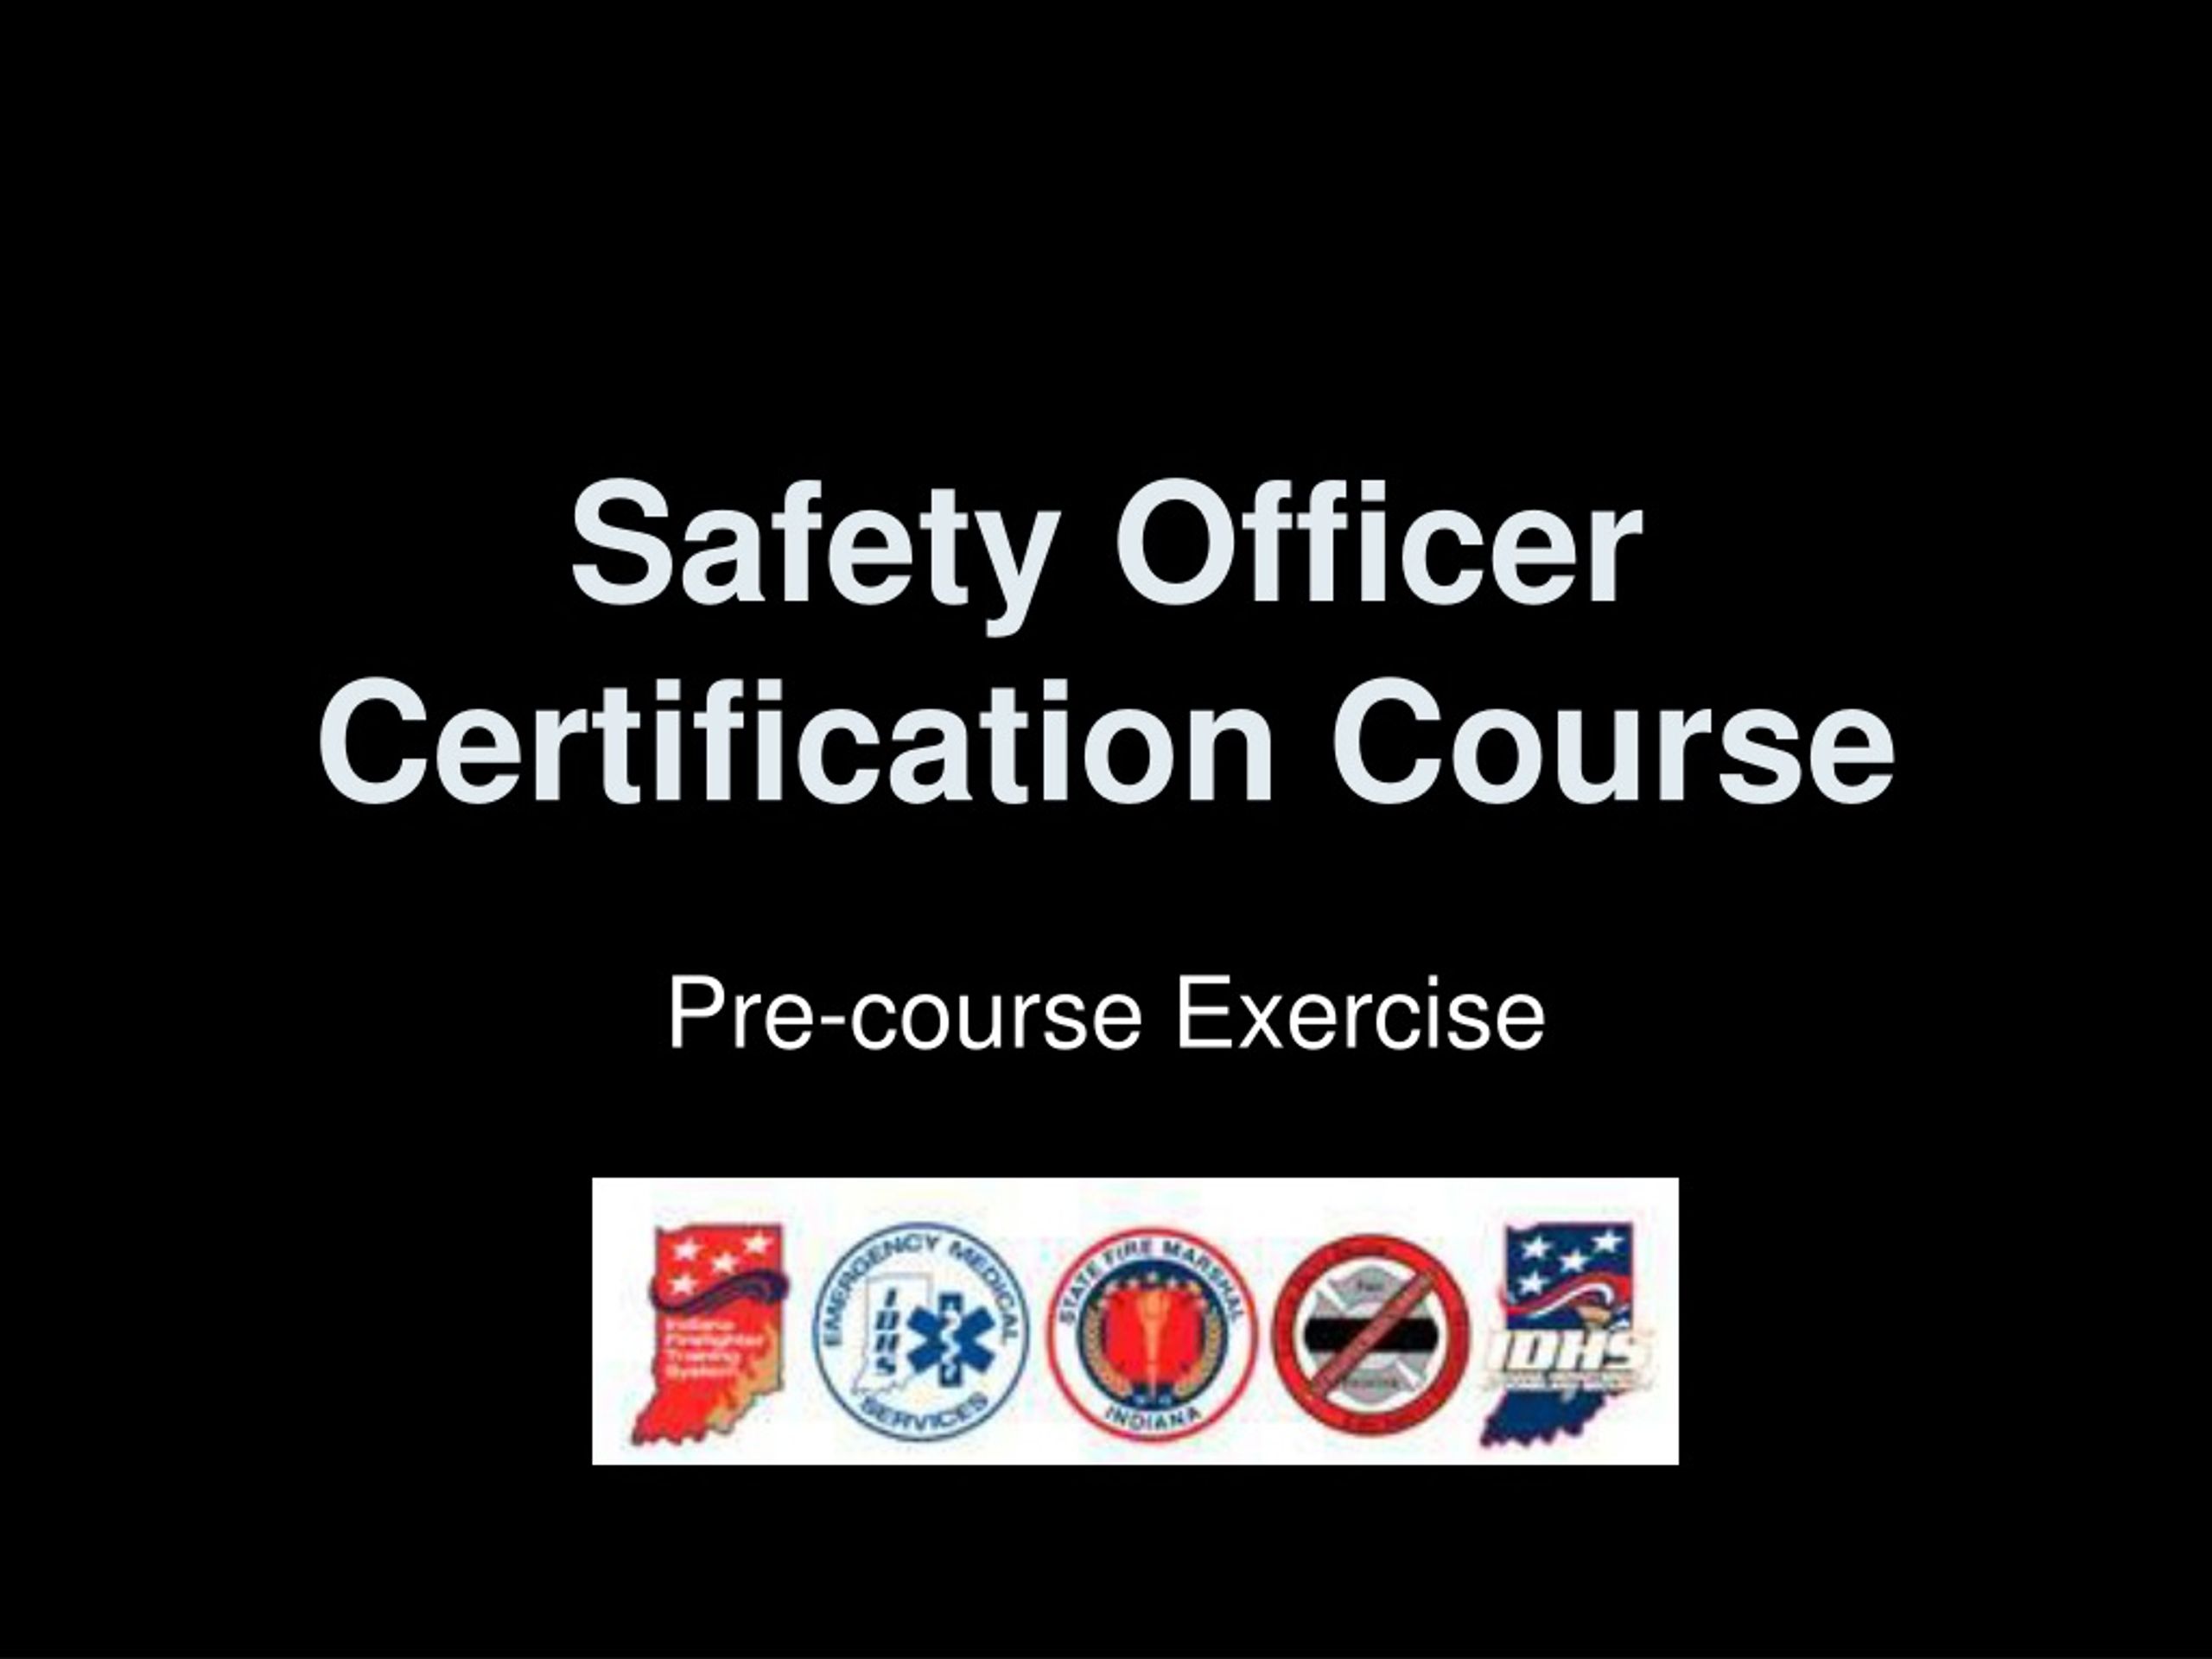 PPT Safety Officer Certification Course PowerPoint Presentation free